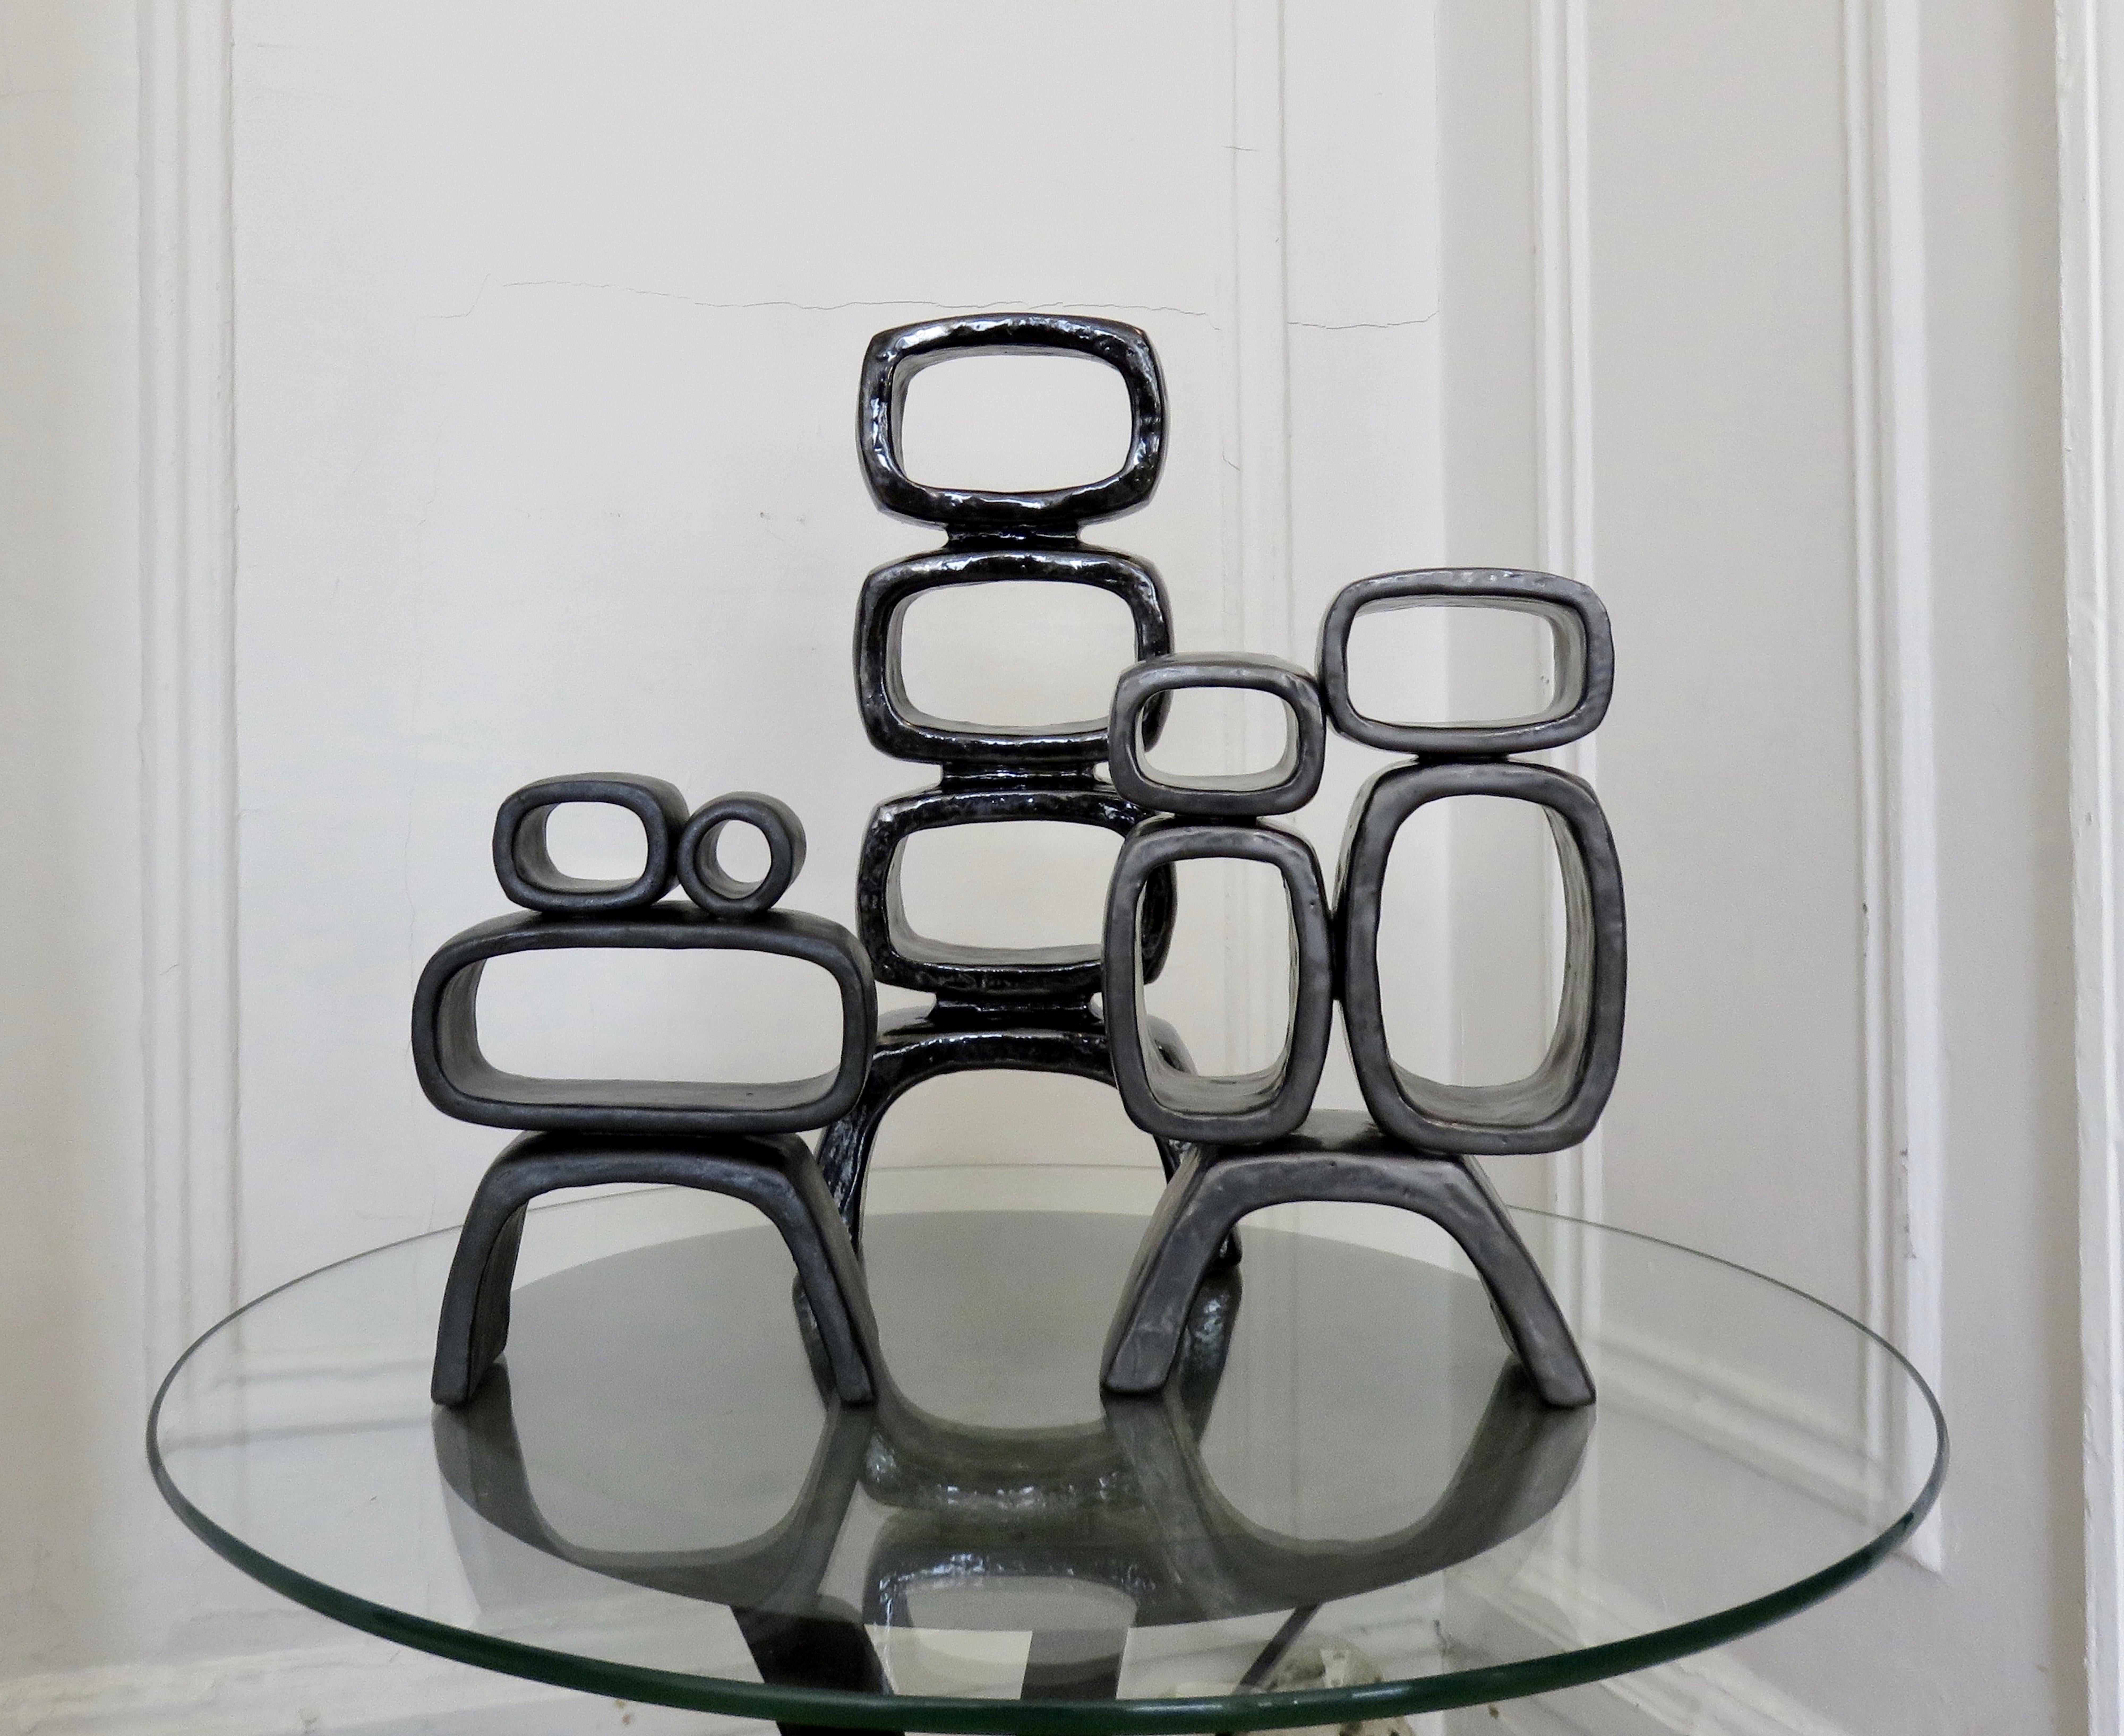 Metallic Black Hand-Built Ceramic Sculpture with Hollow Rings on Angled Legs 12